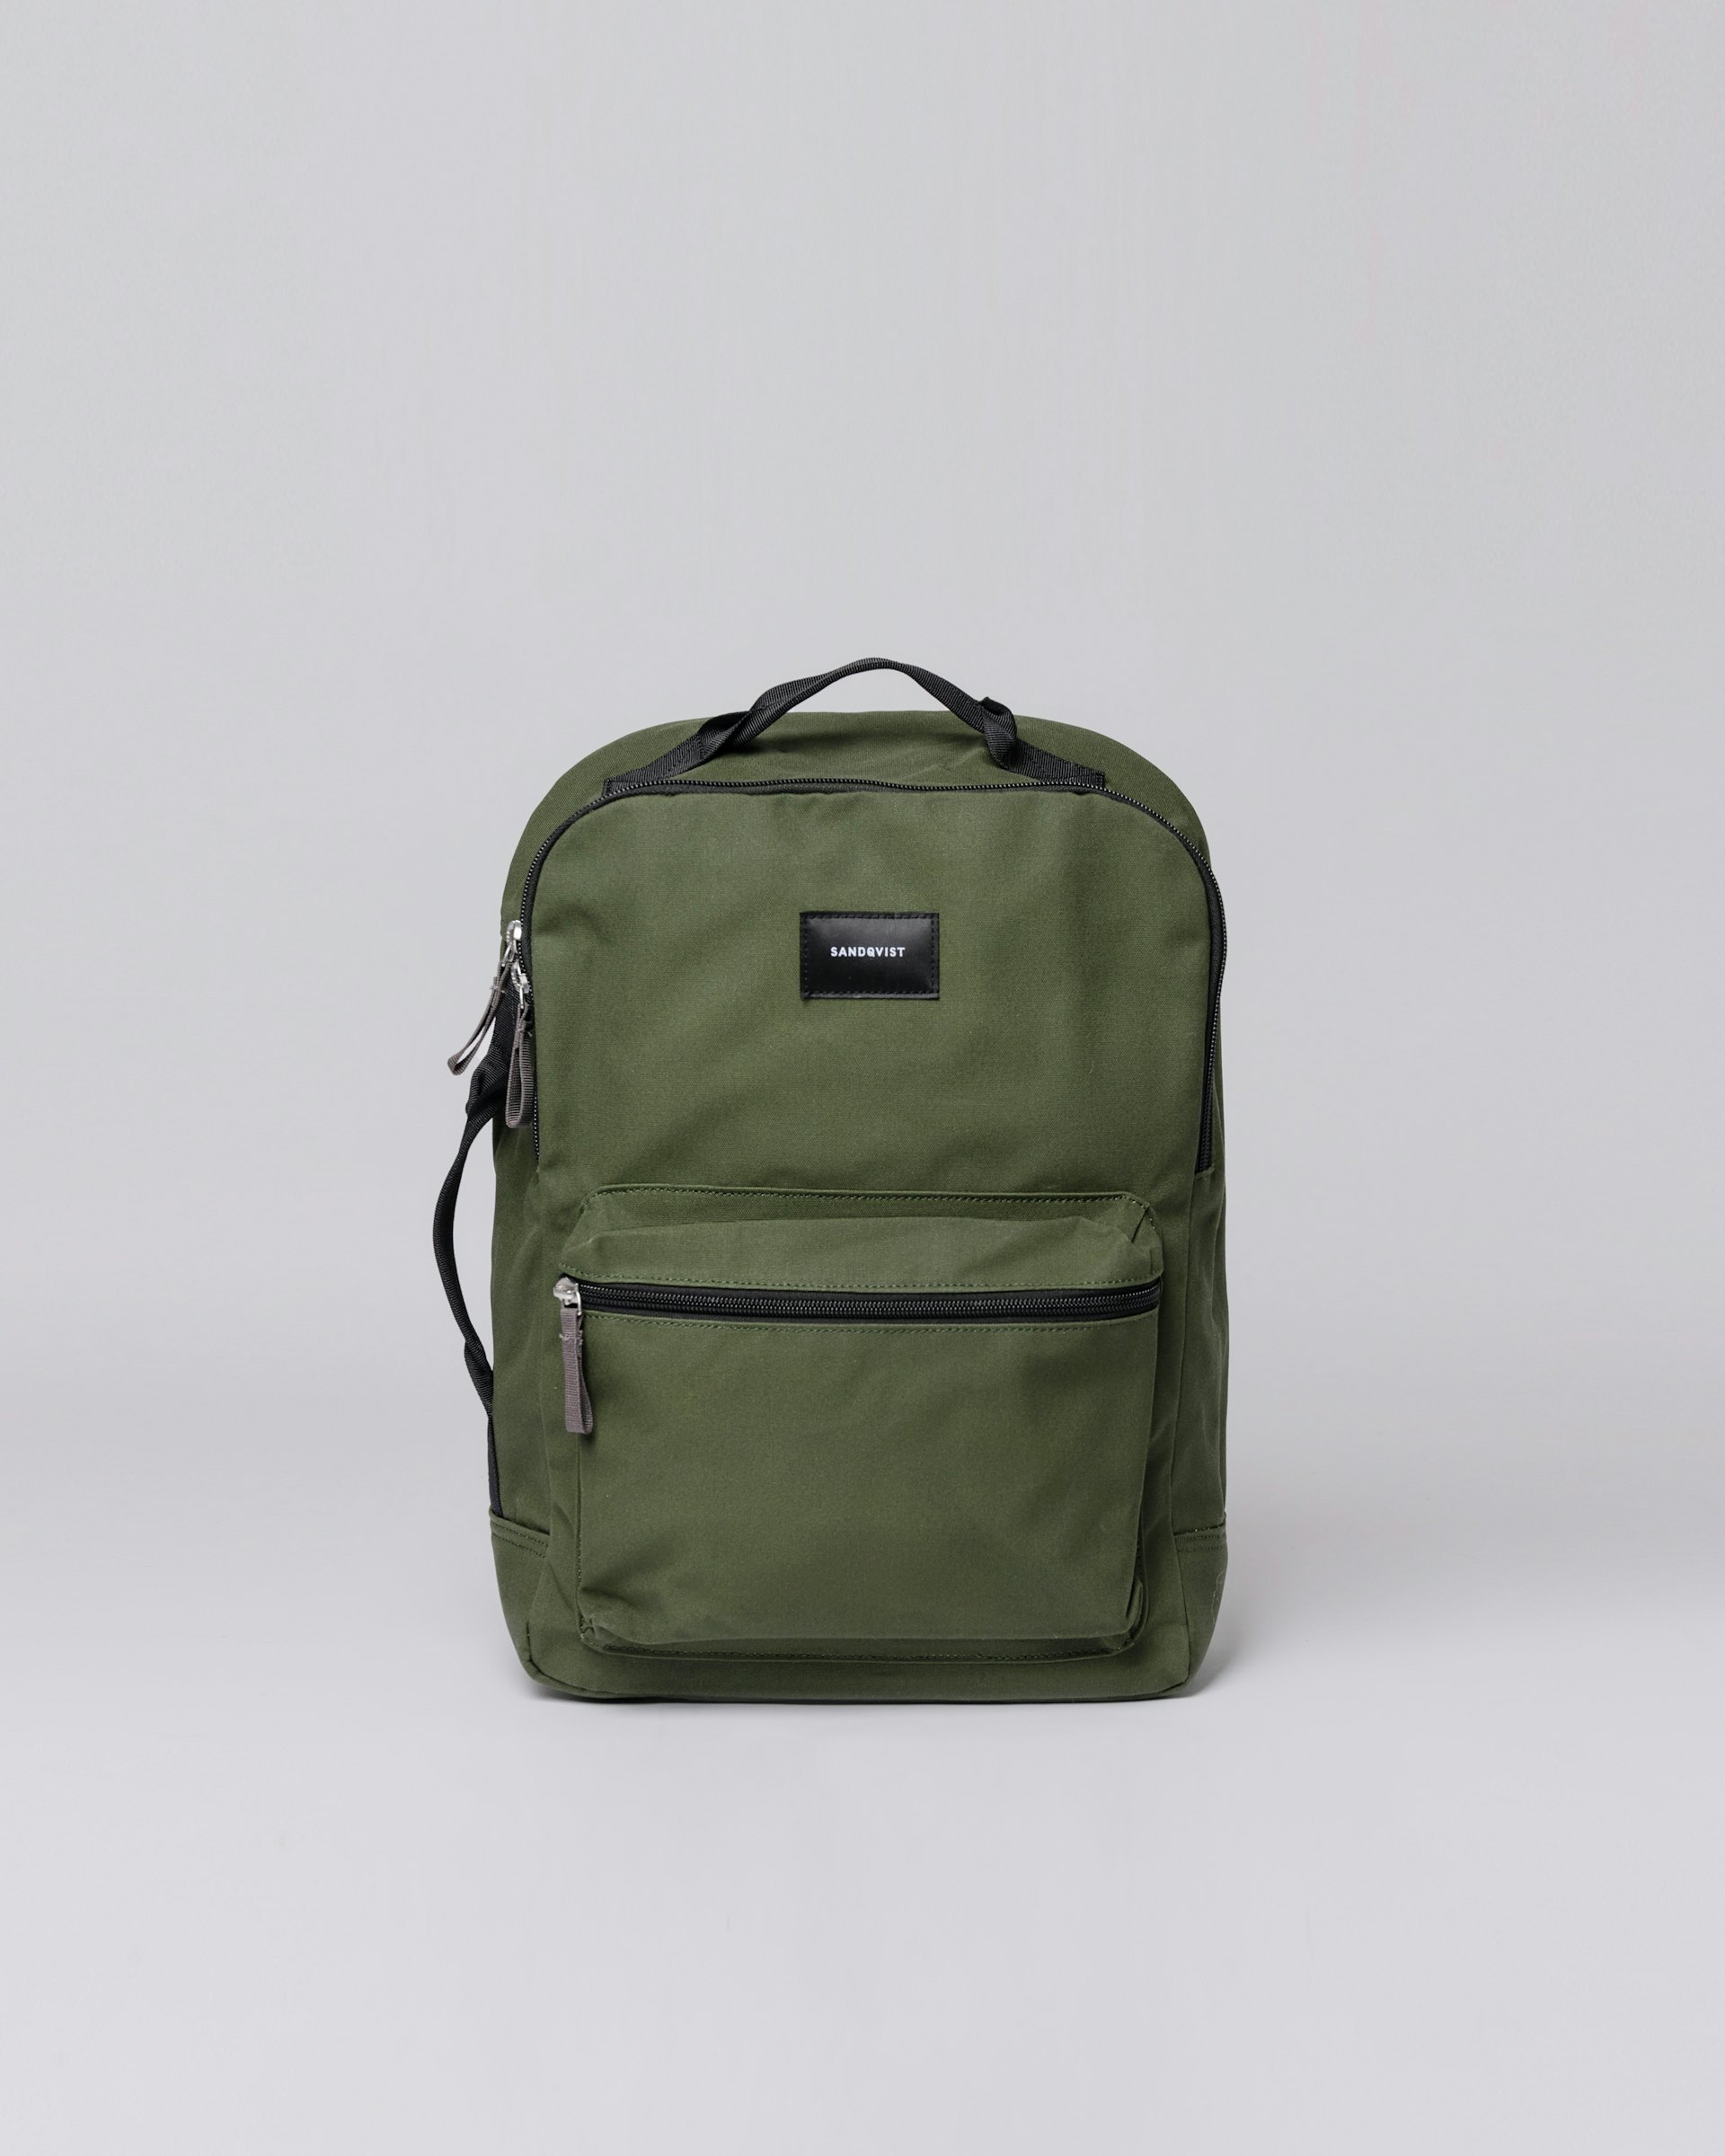 August belongs to the category Backpacks and is in color dawn green